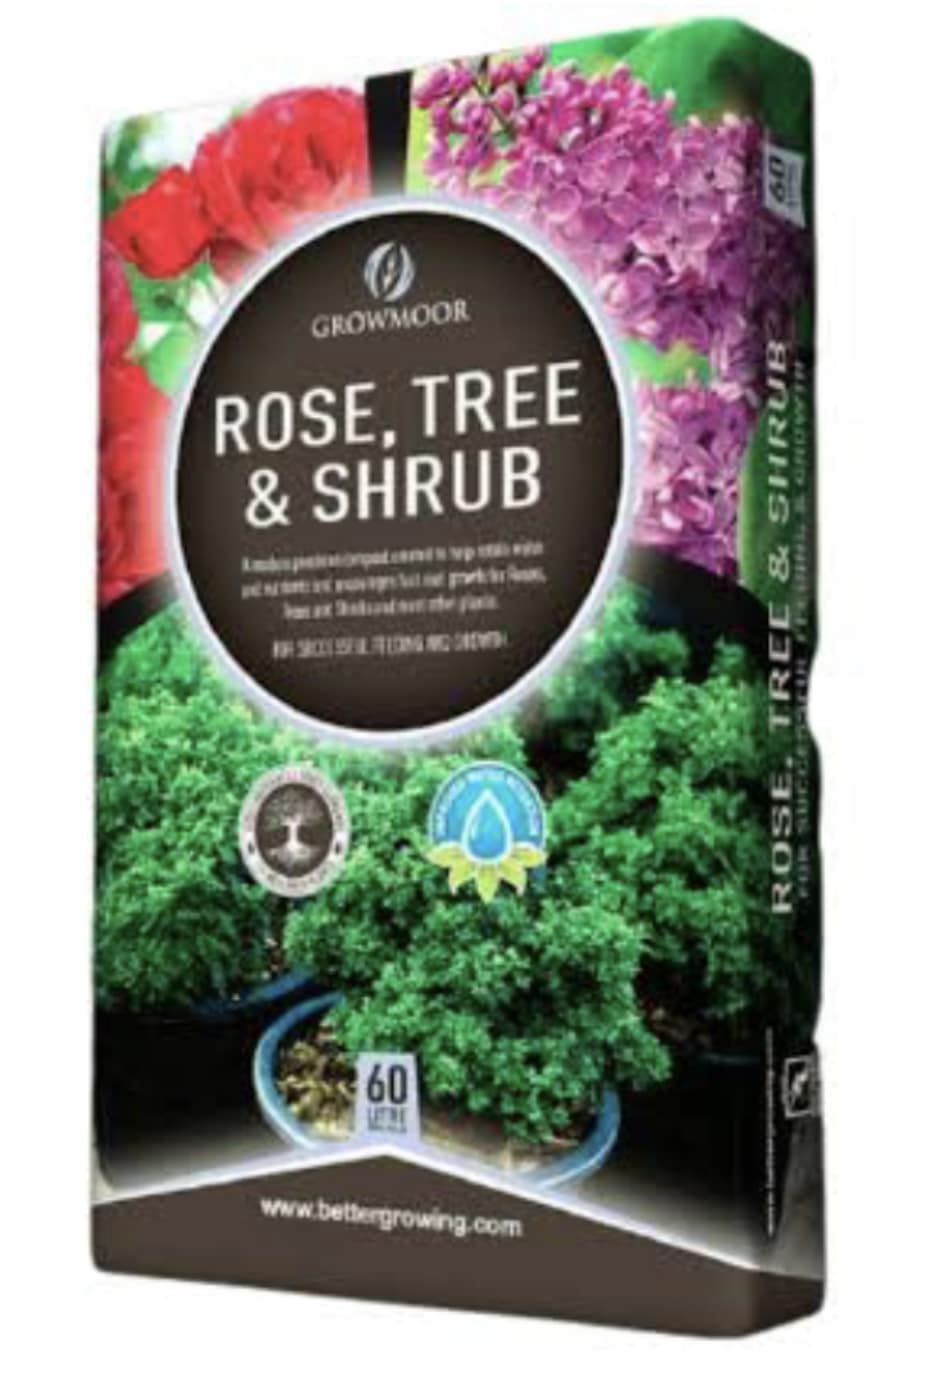 Growmoor Rose, Tree and Shrub 60 ltrs Home, Office, Garden online marketplace